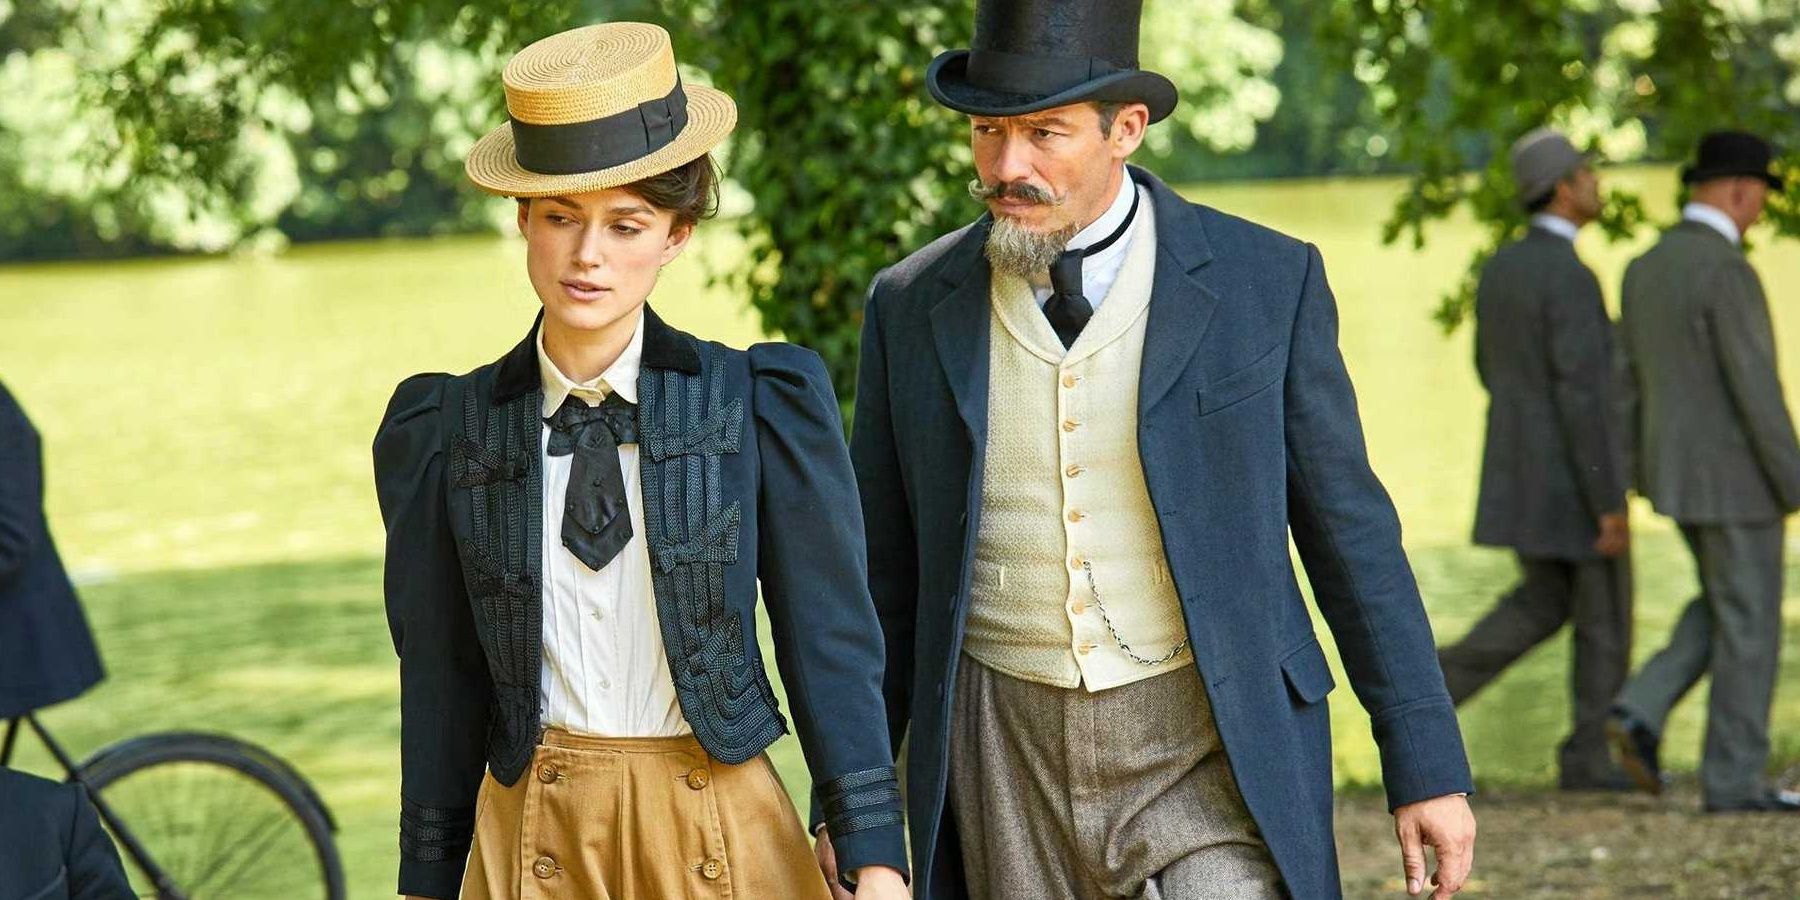 Keira Knightley and Dominic West in Colette.